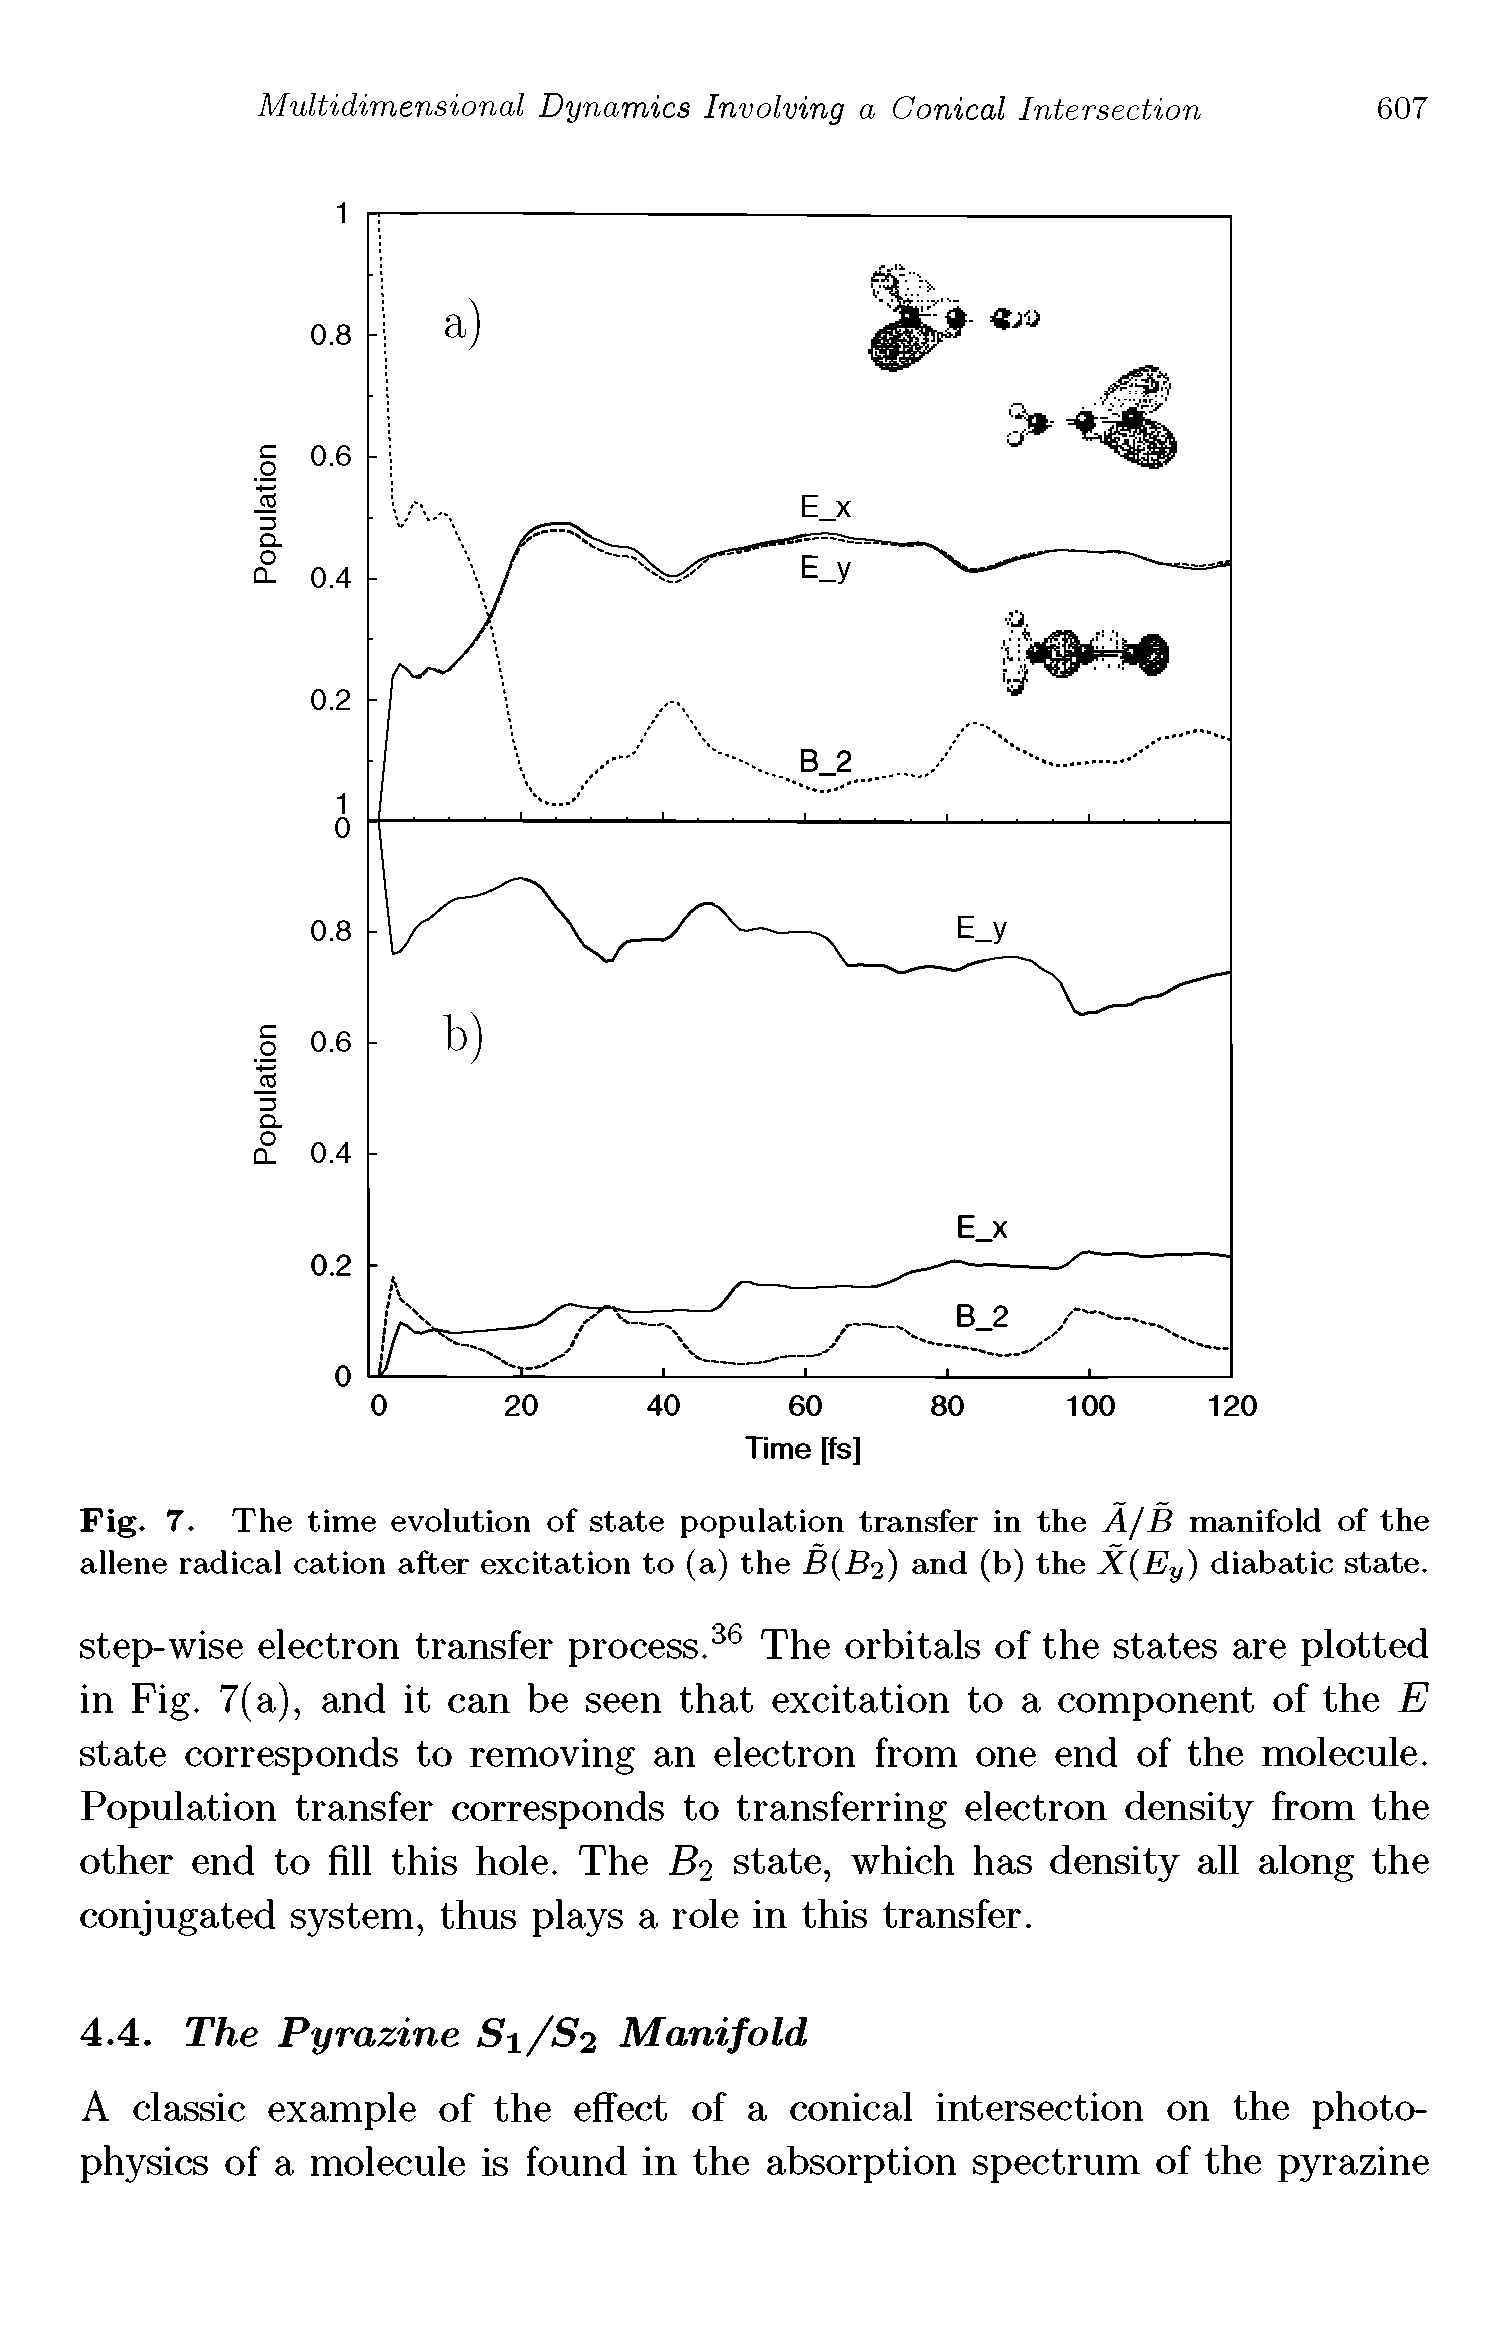 Fig. 7. The time evolution of state population transfer in the A/B manifold of the allene radical cation after excitation to (a) the B B2) and (b) the X Ey) diabatic state.